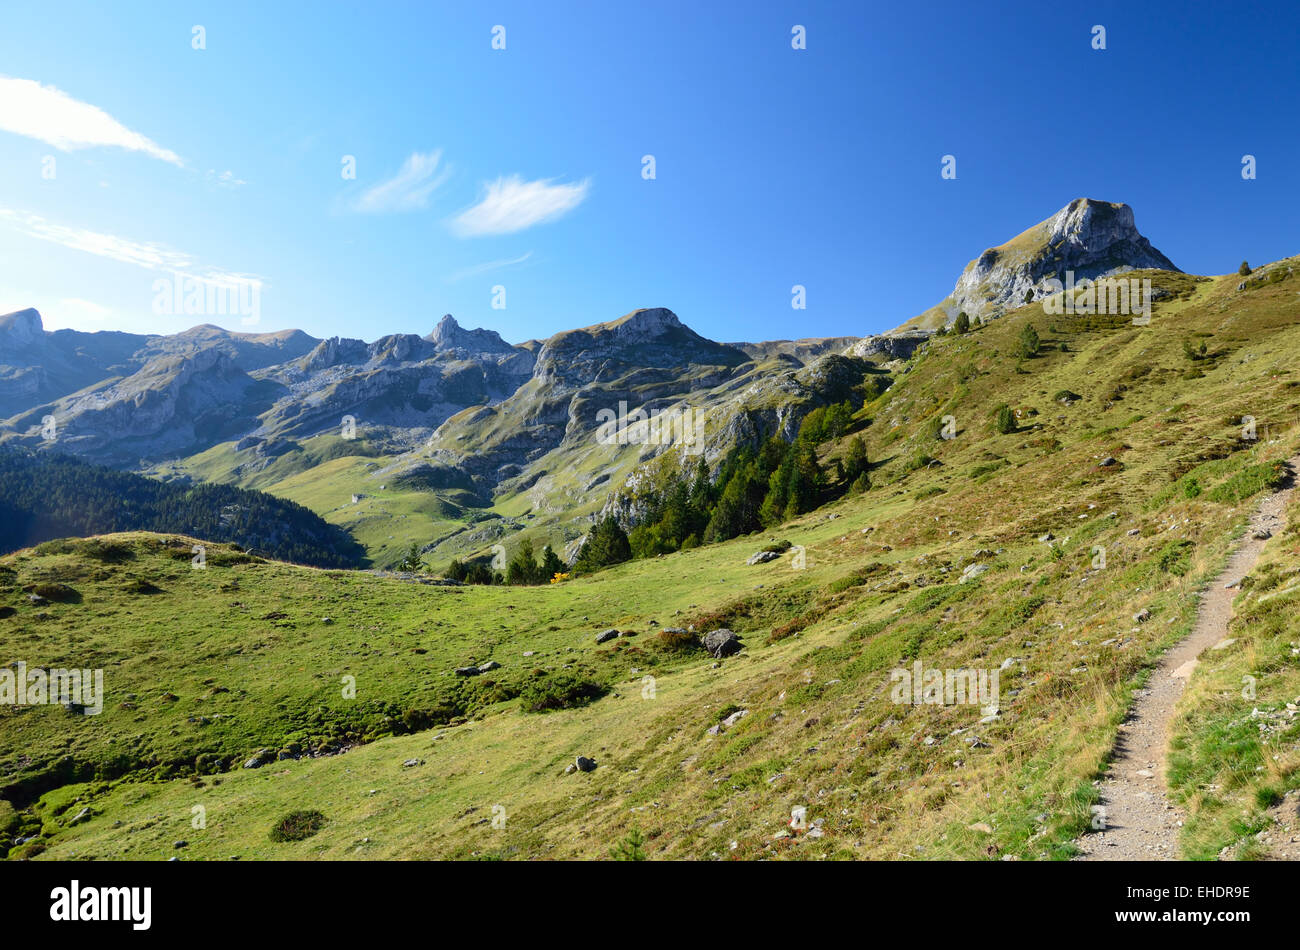 Hiking trail on the mountain slope Stock Photo